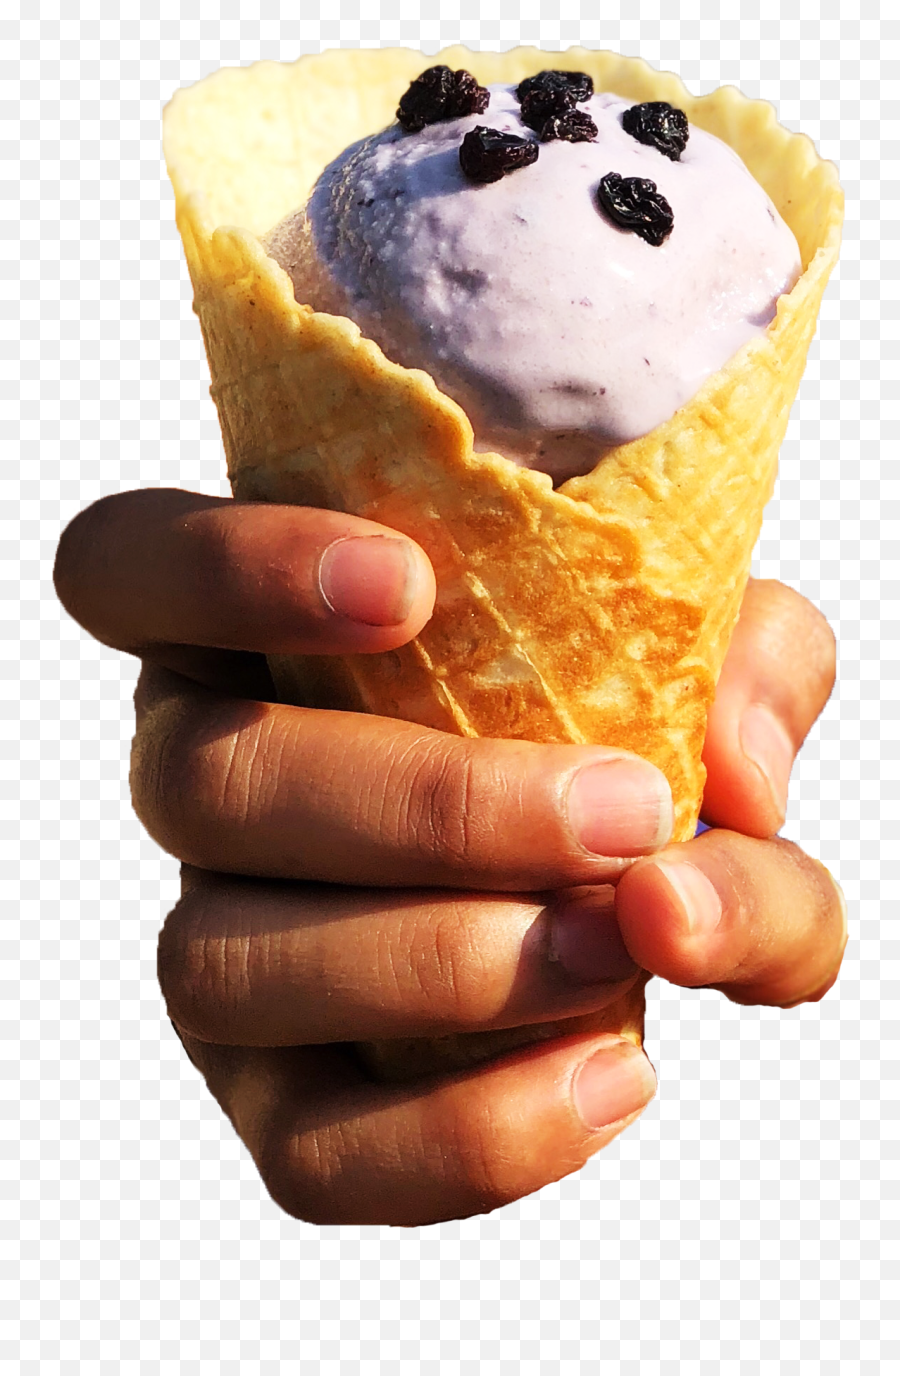 Blueberry - Png Dittoo Icecreams Cone Emoji,Blueberry Png